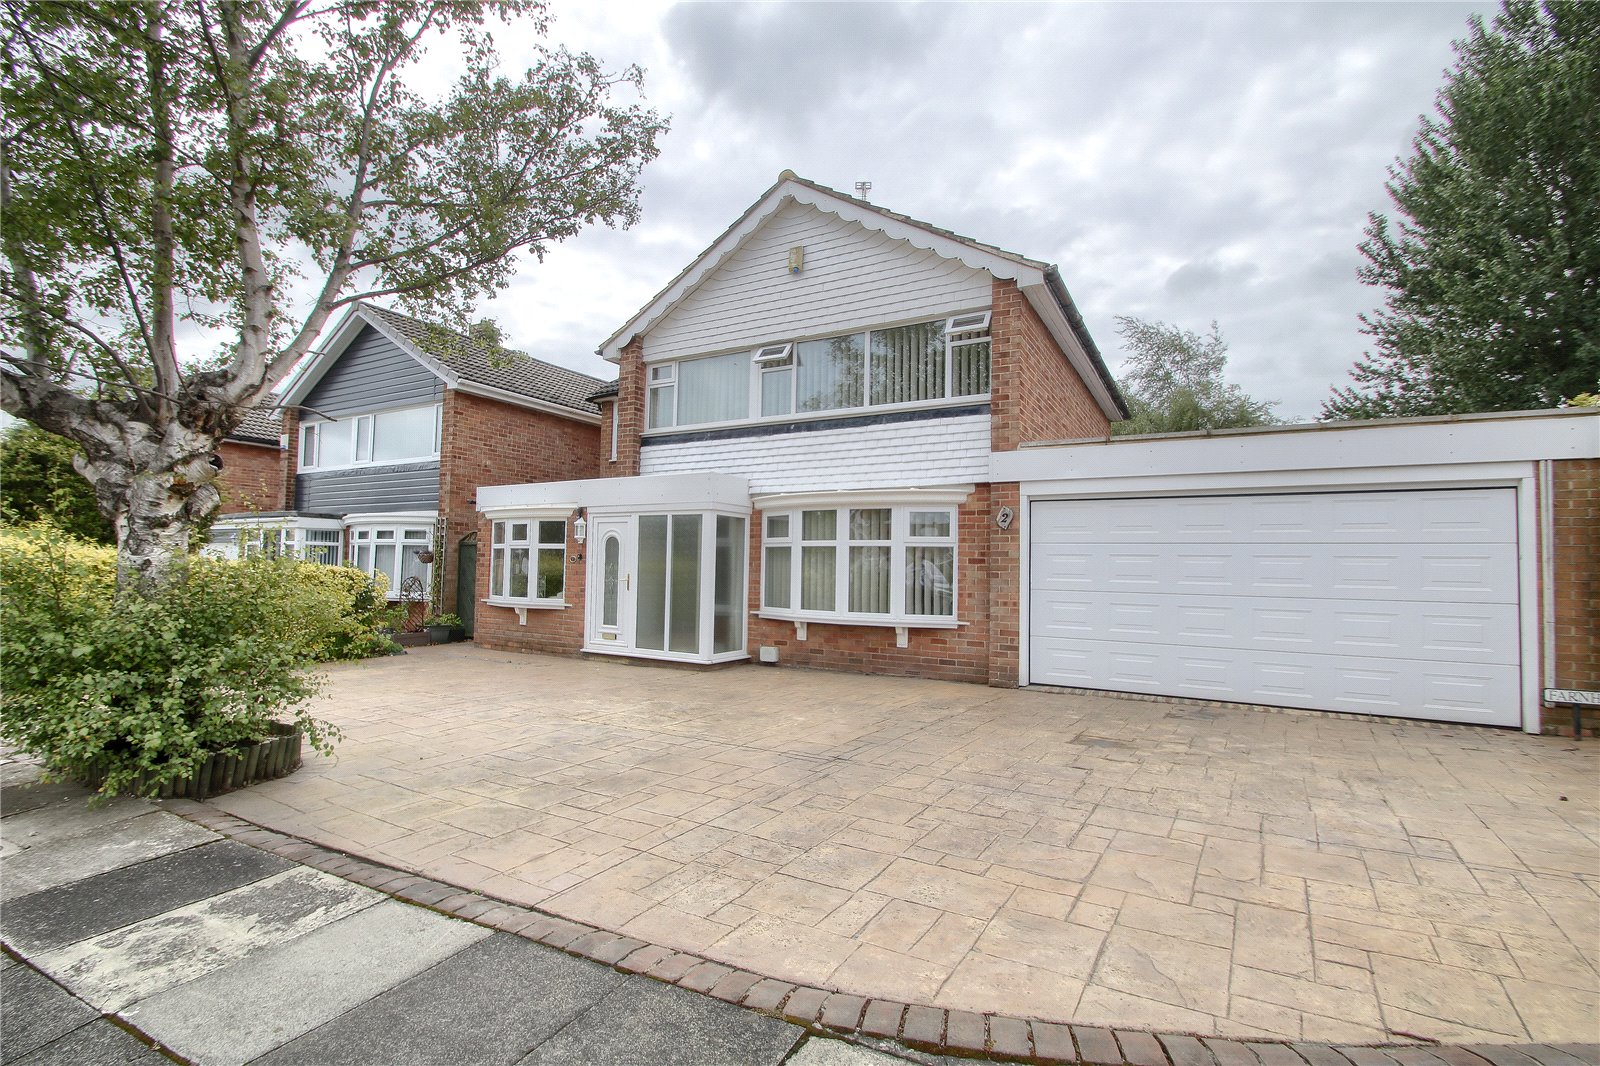 4 bed house for sale in Farnham Close, Eaglescliffe - Property Image 1